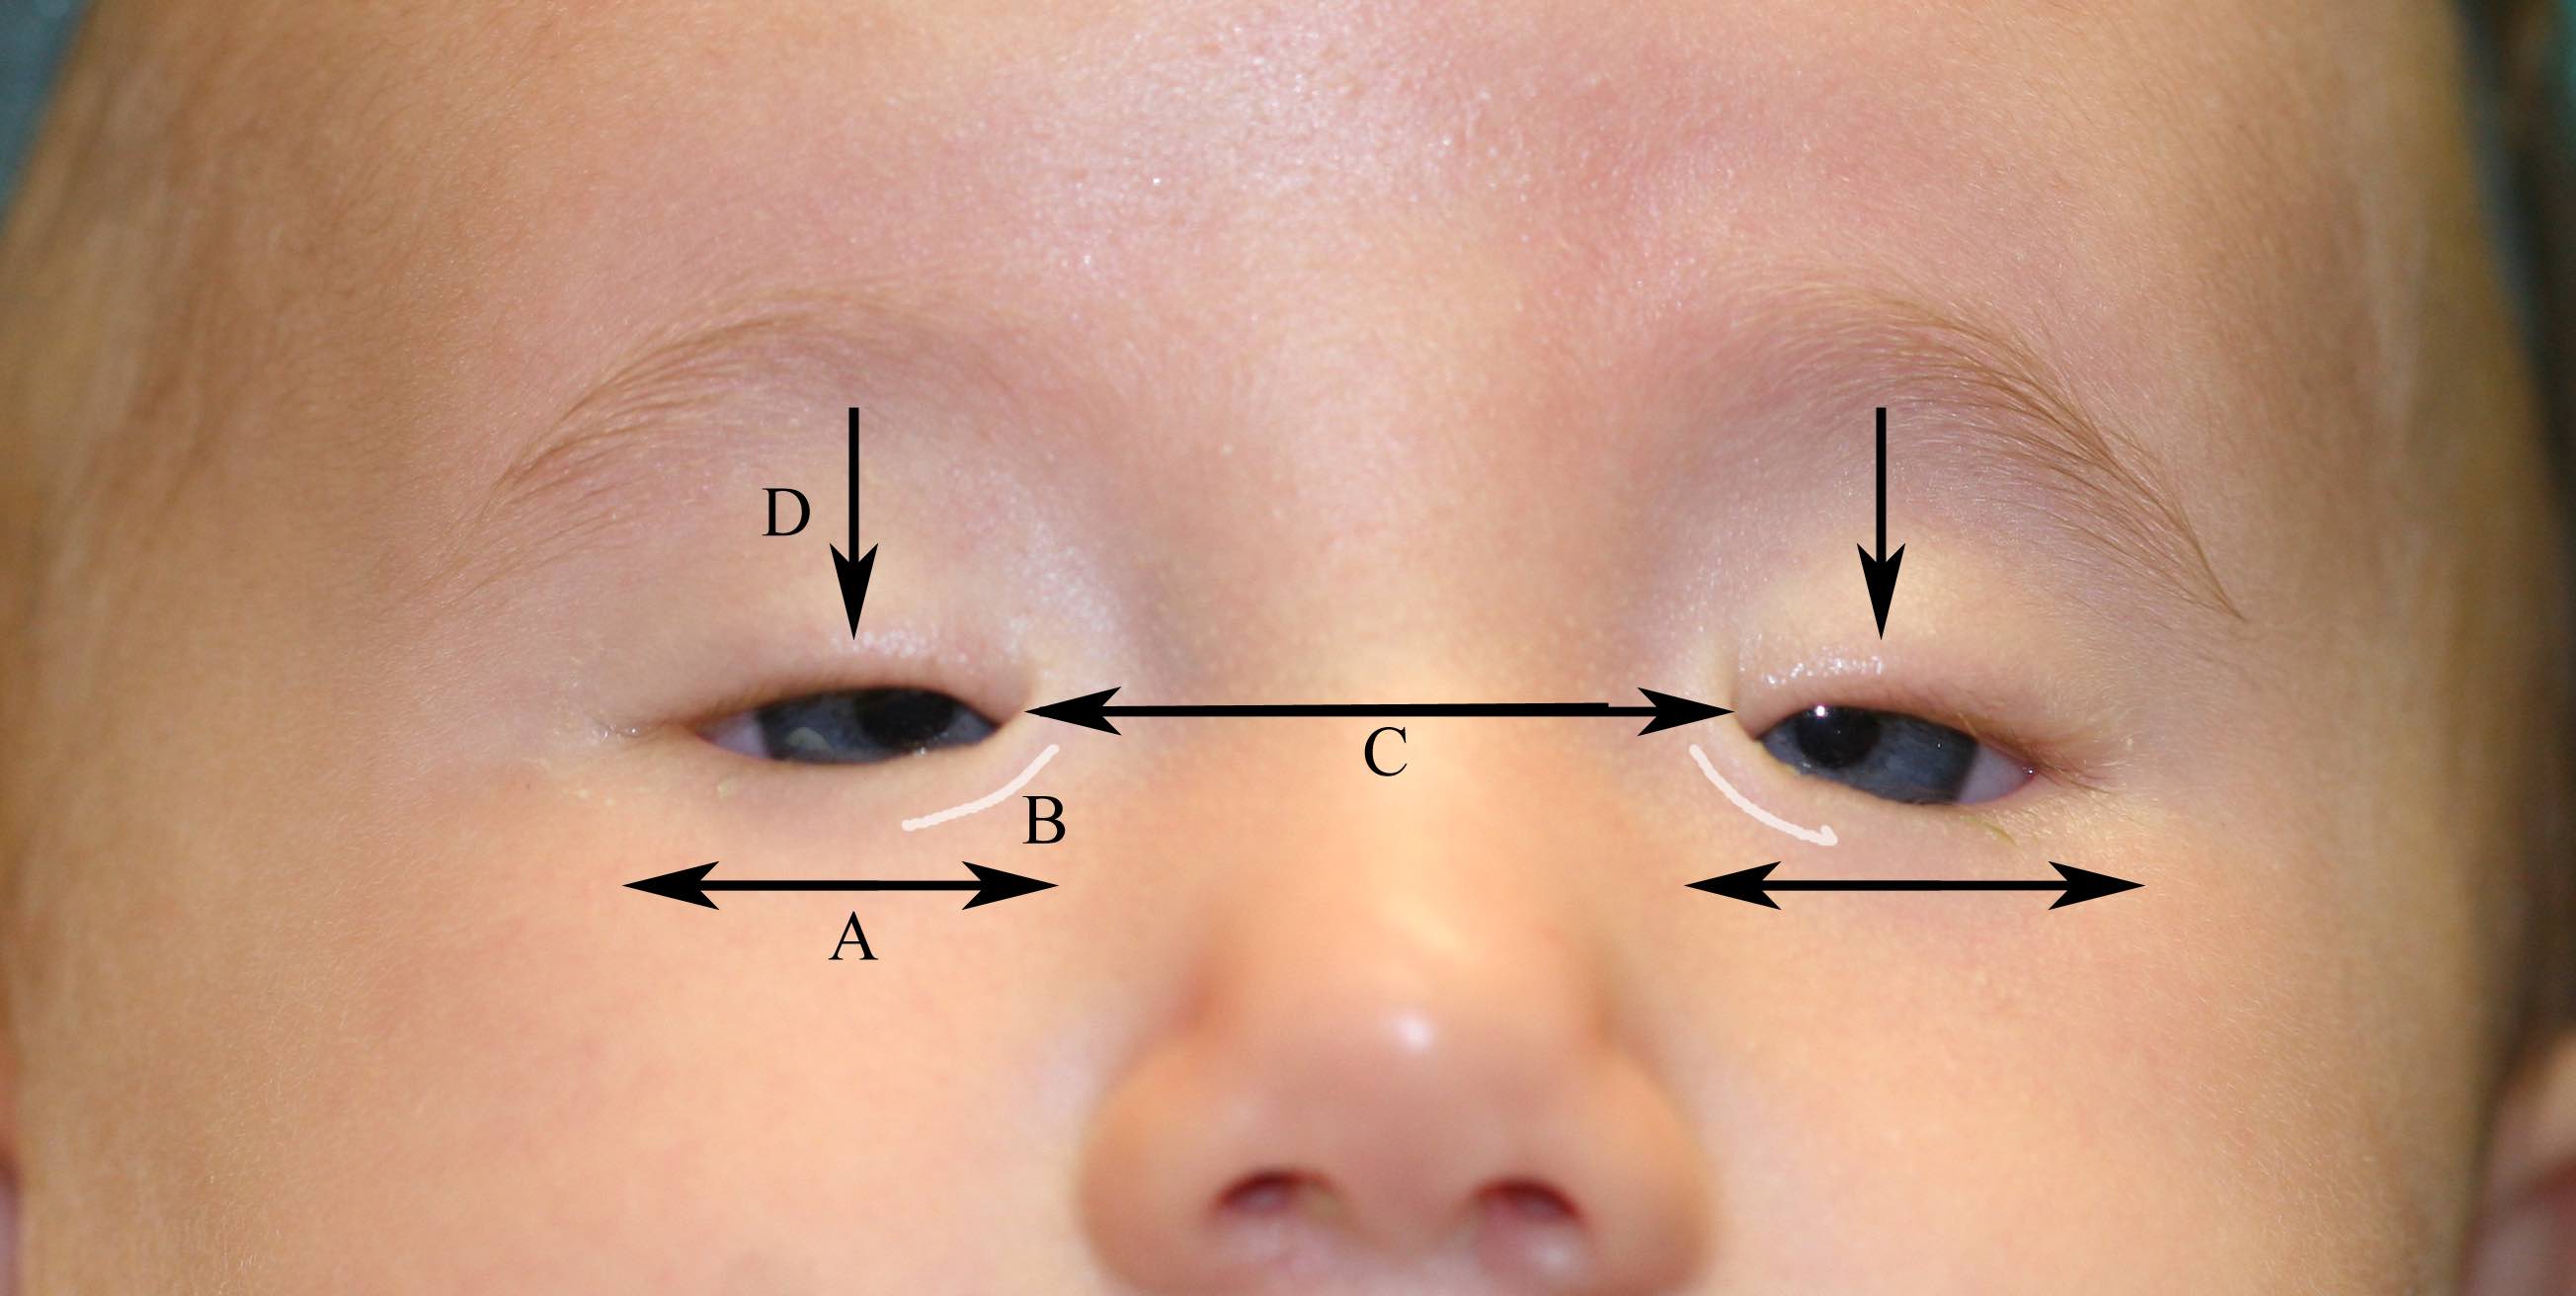 Blepharophimosis Syndrome: A. Blepharophimosis B: Epicanthus Inversus C: Telecanthus D: Ptosis